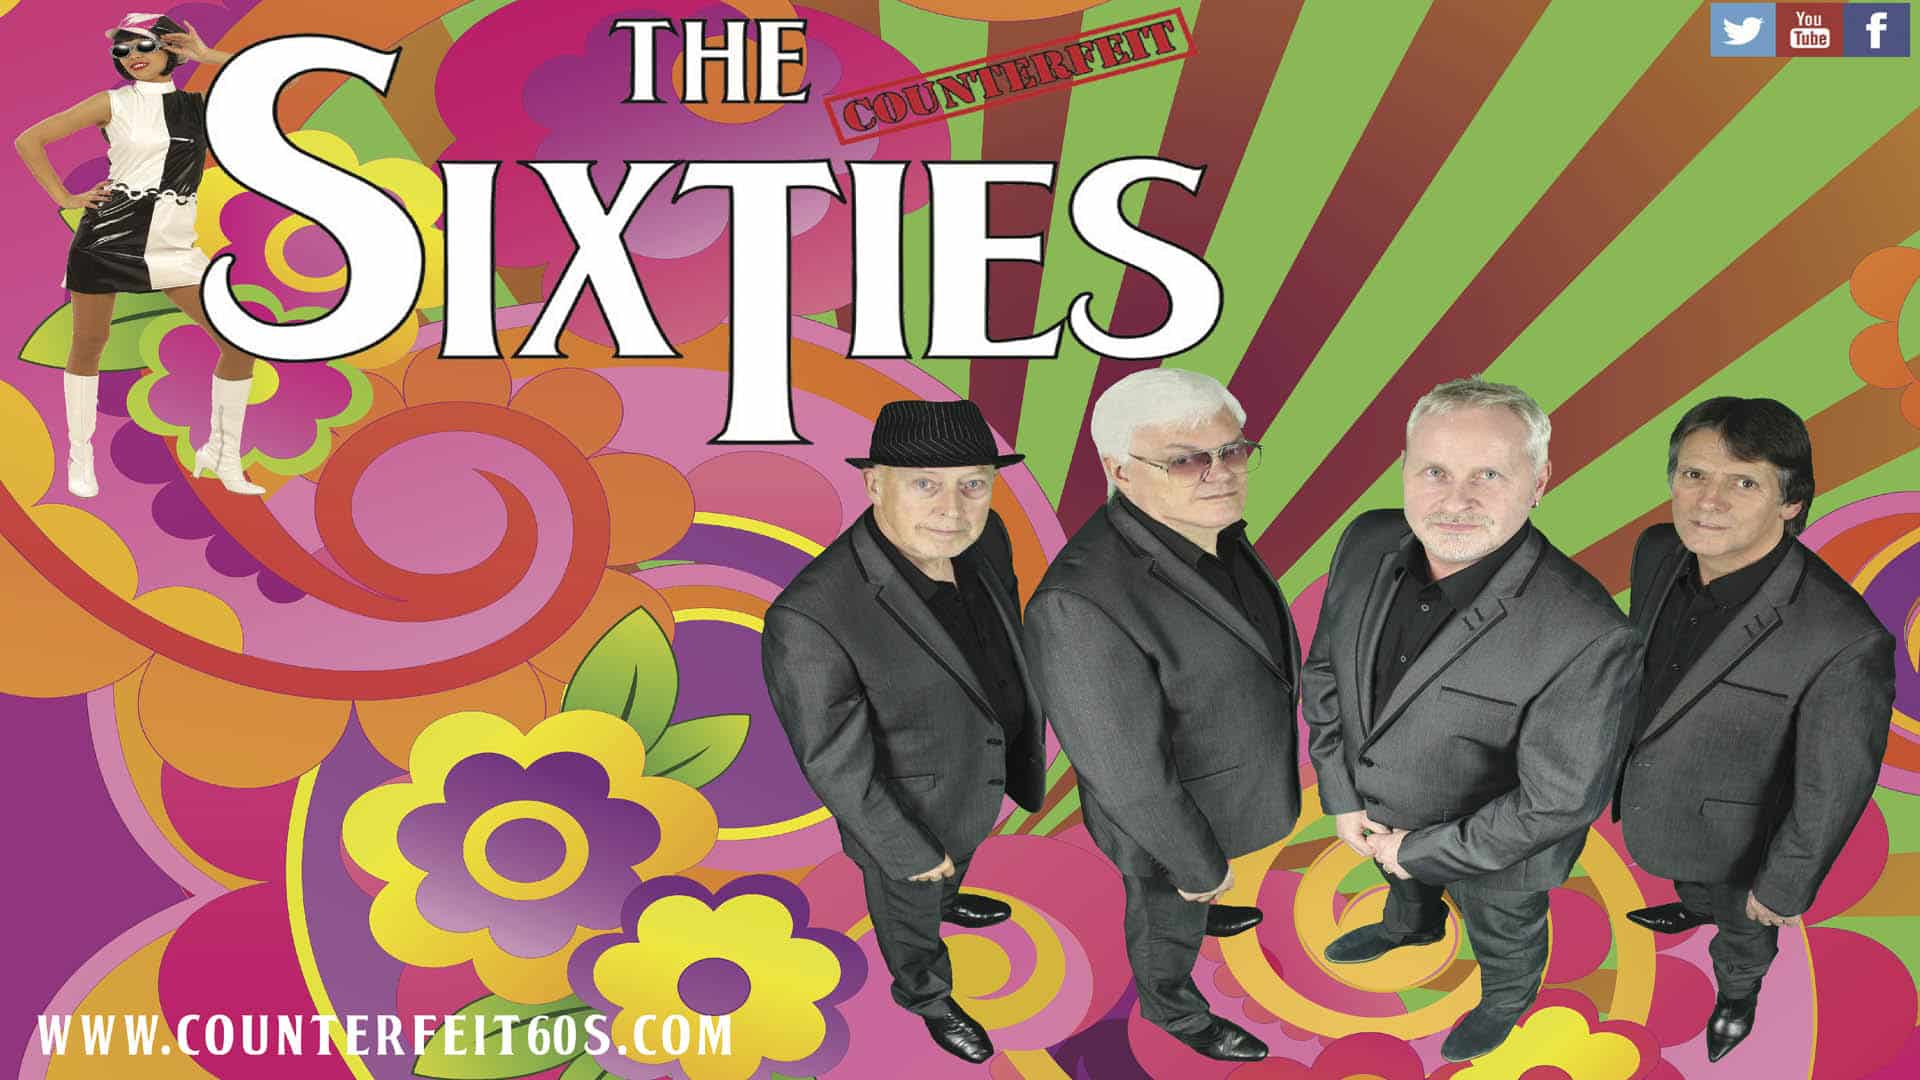 Text reads: The Counterfeit Sixties 4 men in dark grey suits are staring up at the camera. The background is swirls and stripes of pink, orange and green with yellow and purple flowers